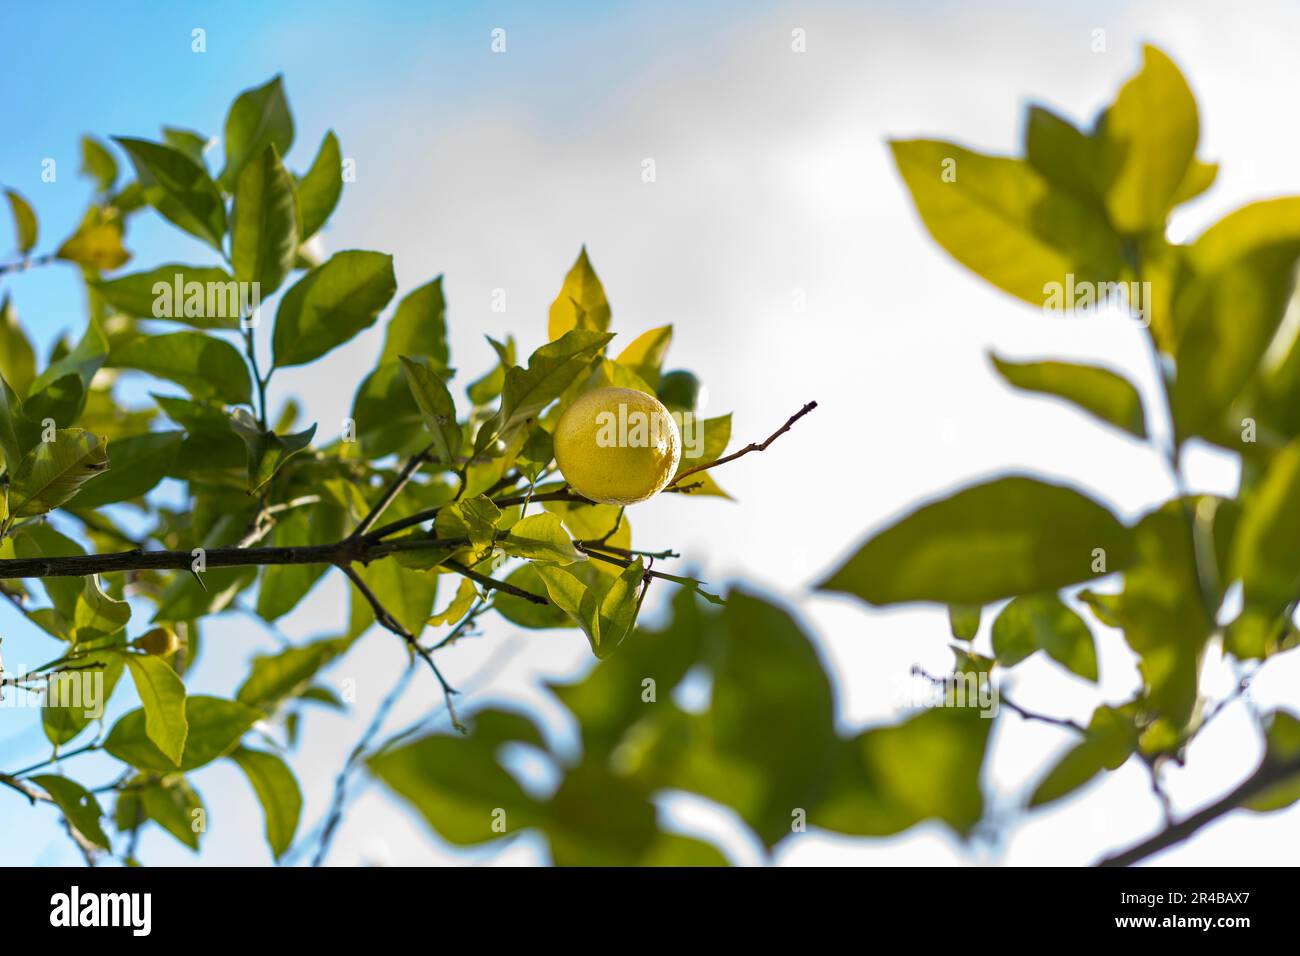 Low angle view of a fresh lemon and green leaves on lemon tree Stock Photo